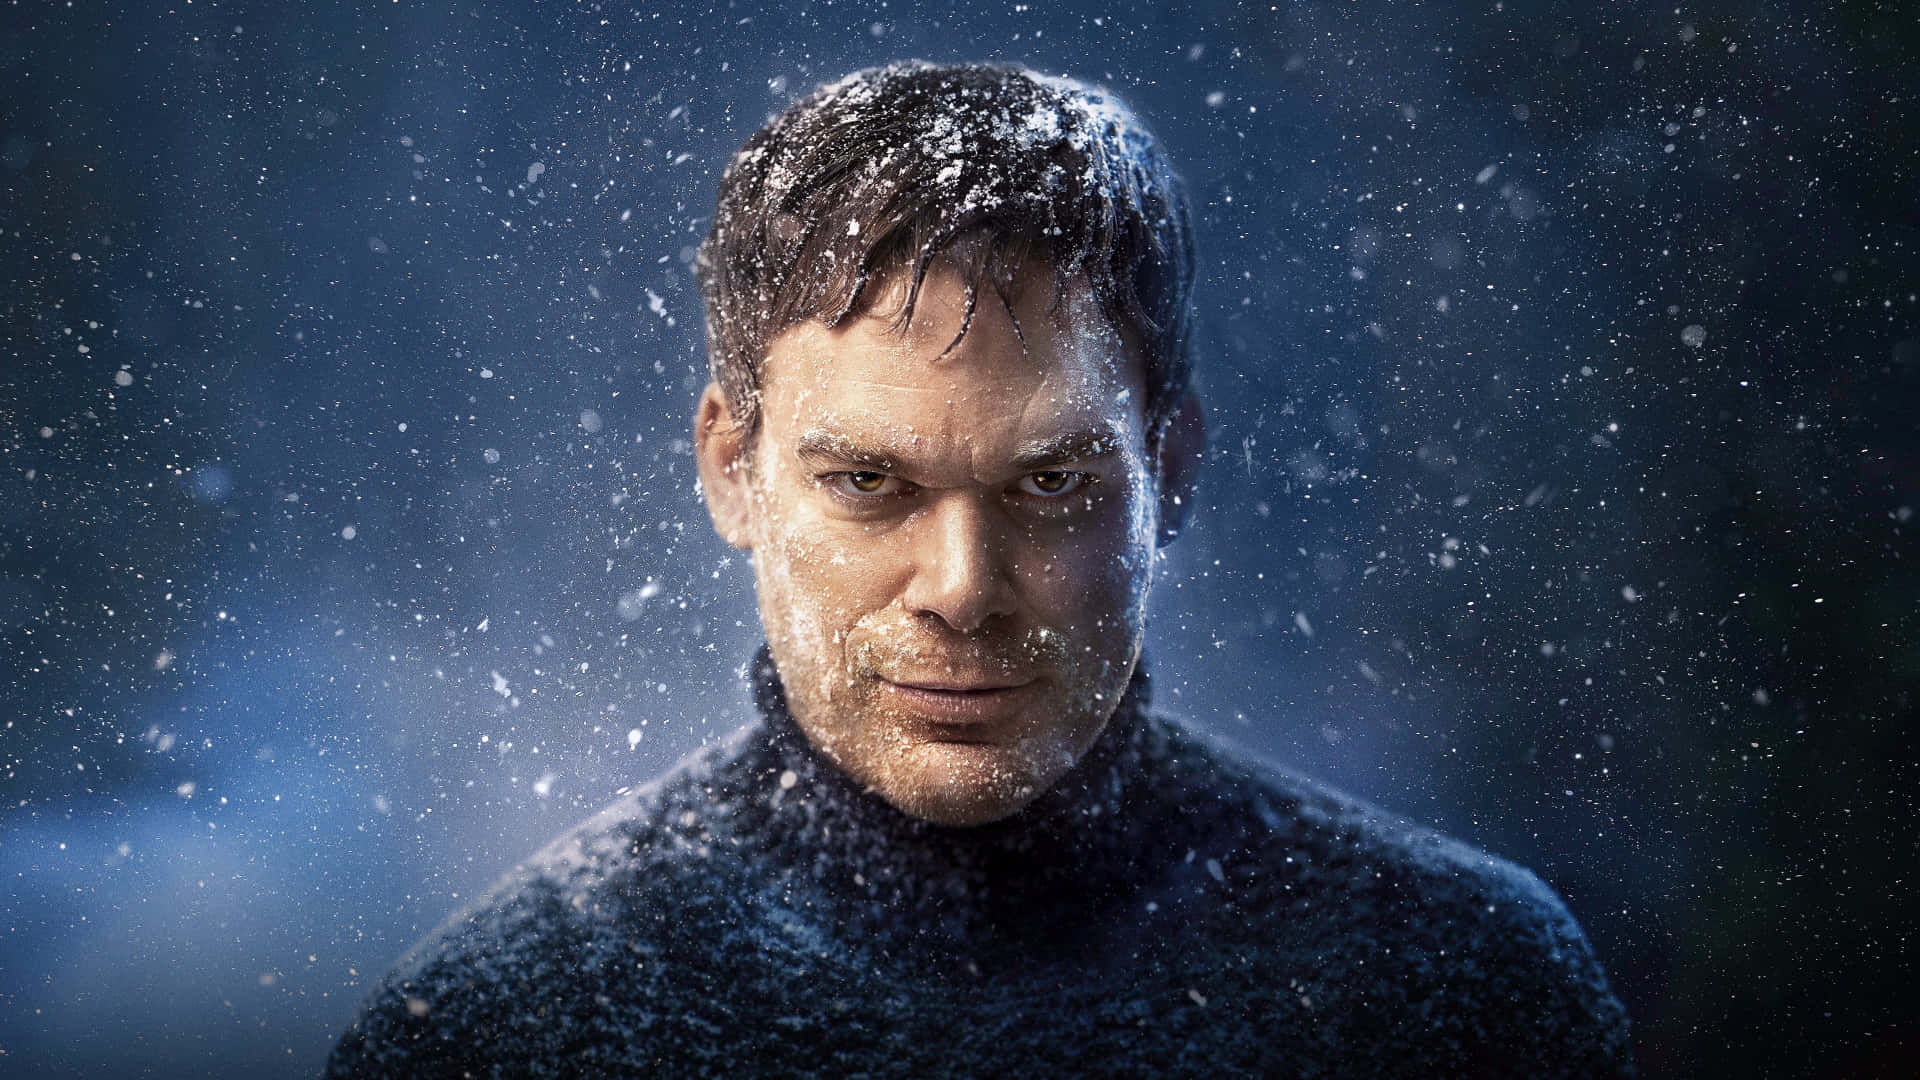 Actor Michael C. Hall looks to the future. Wallpaper